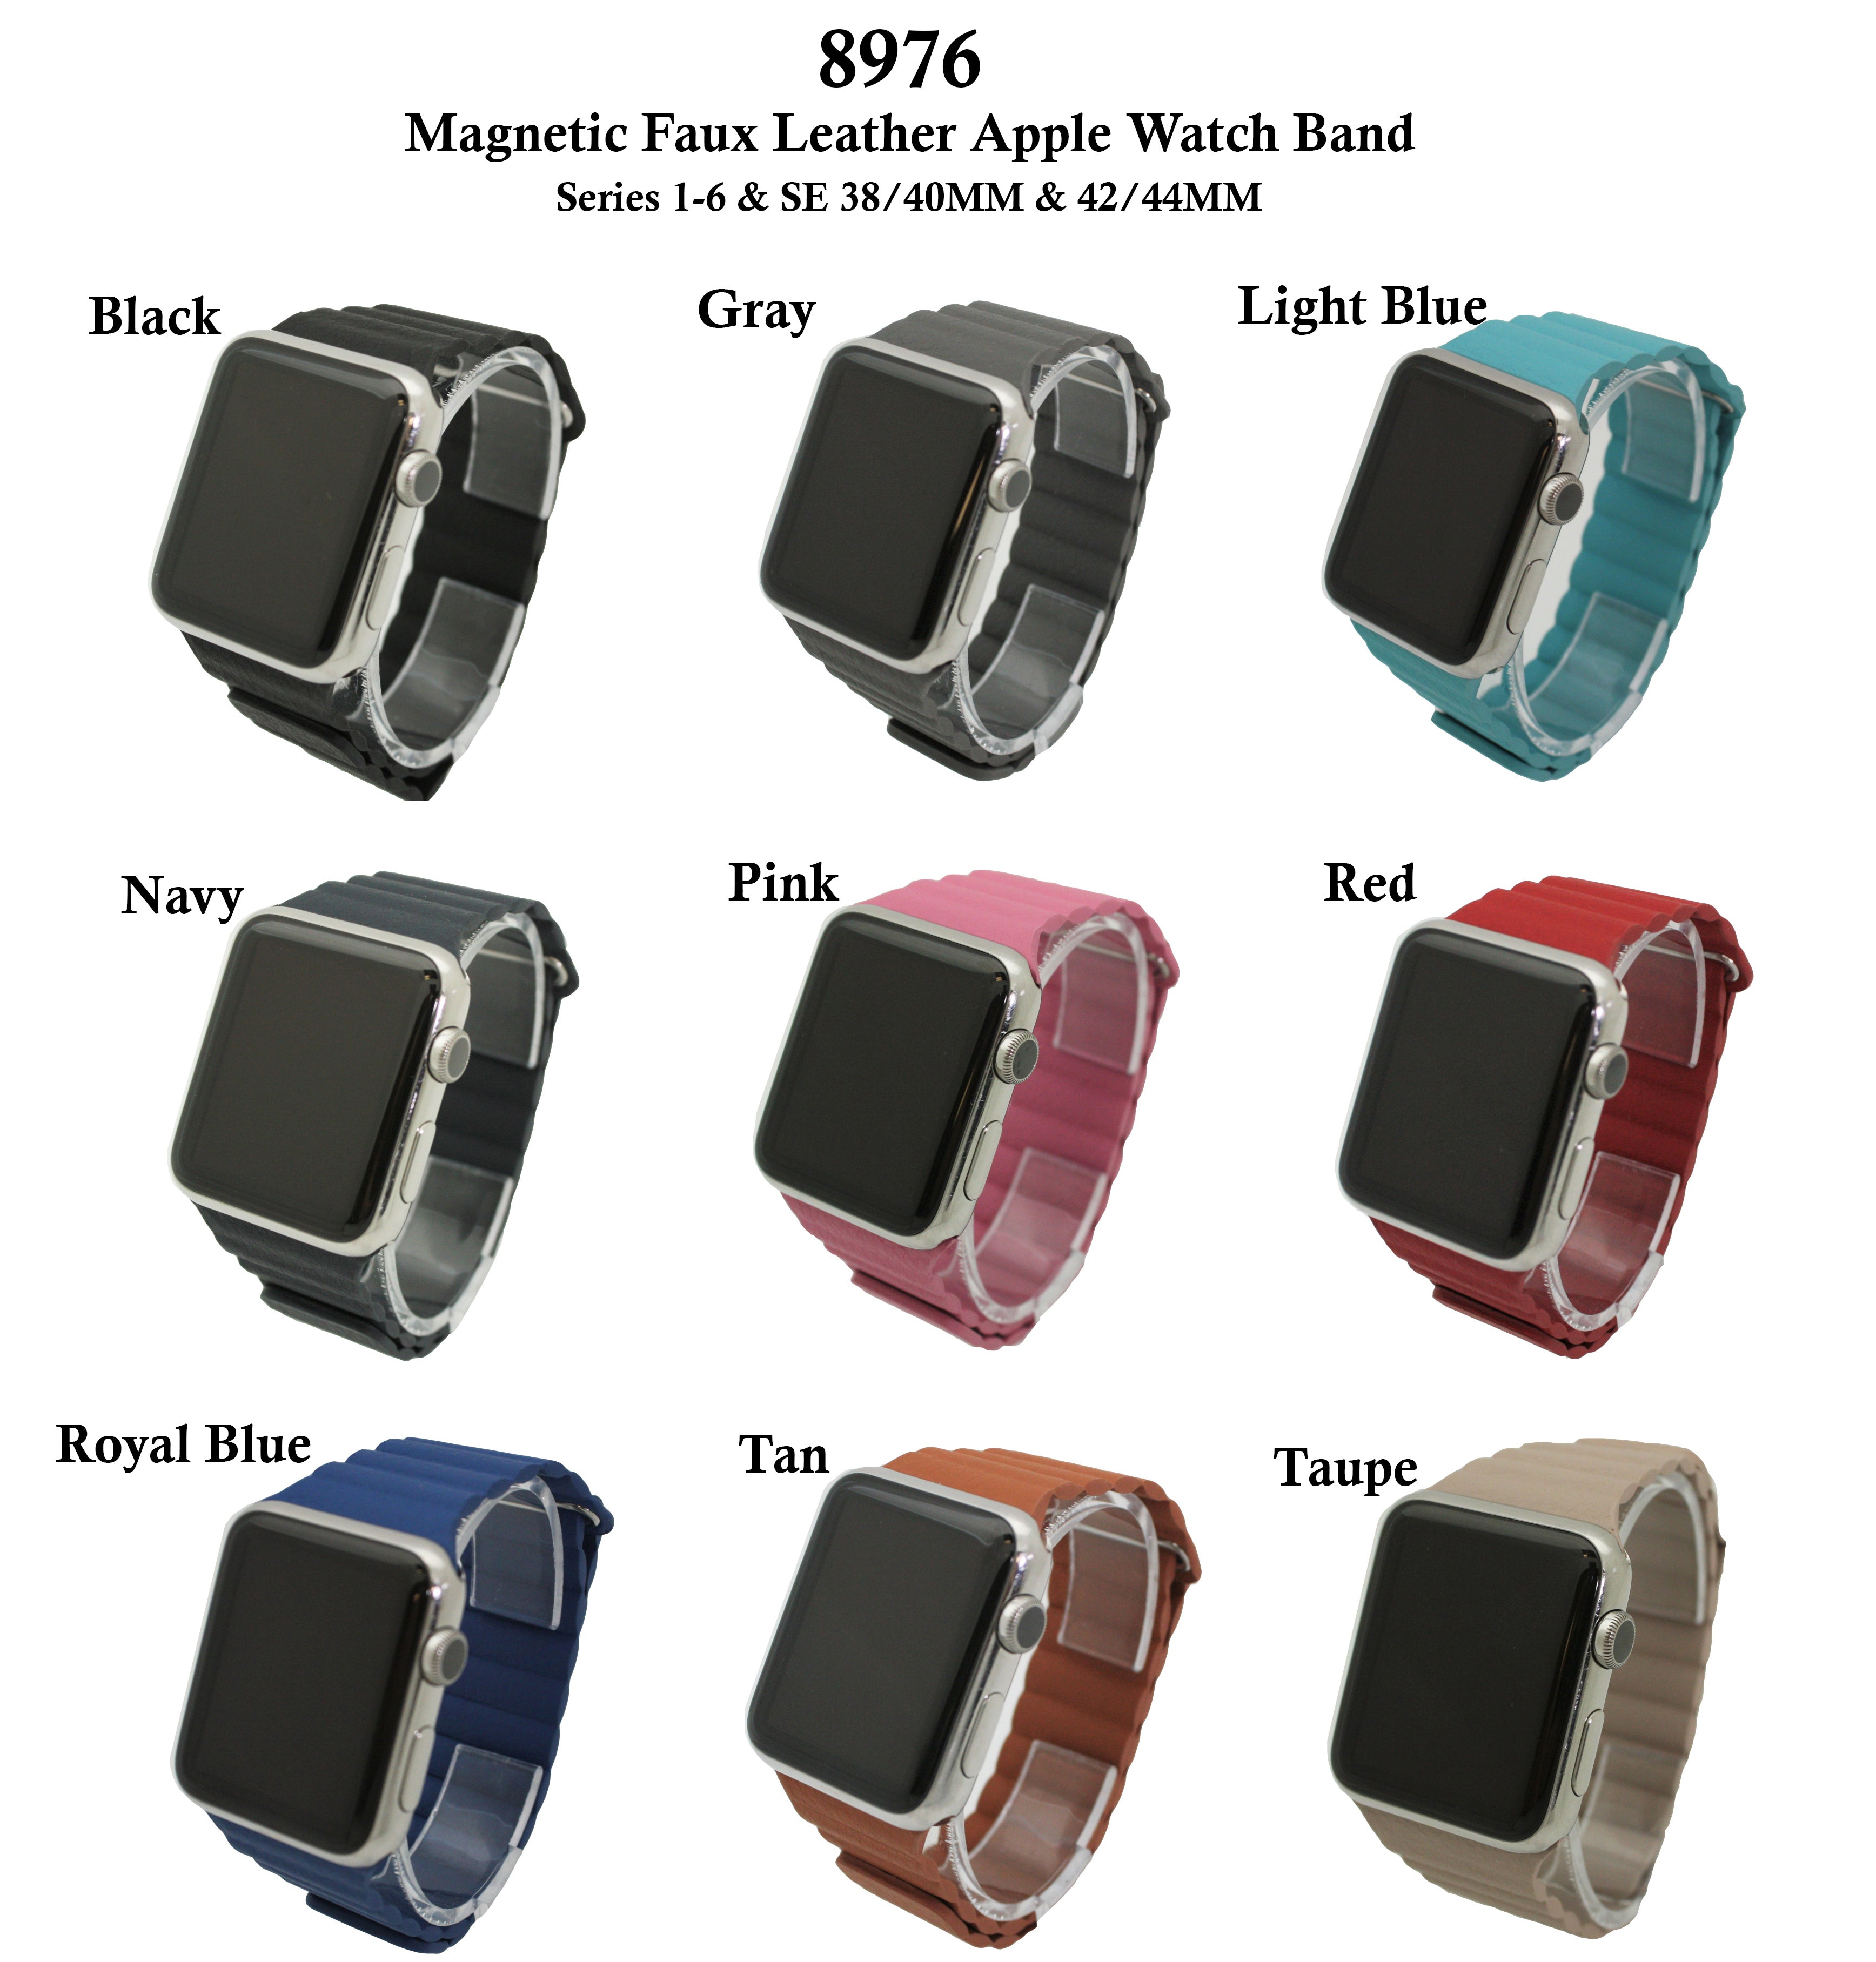 6 Faux Leather Magnetic Apple Watch Band